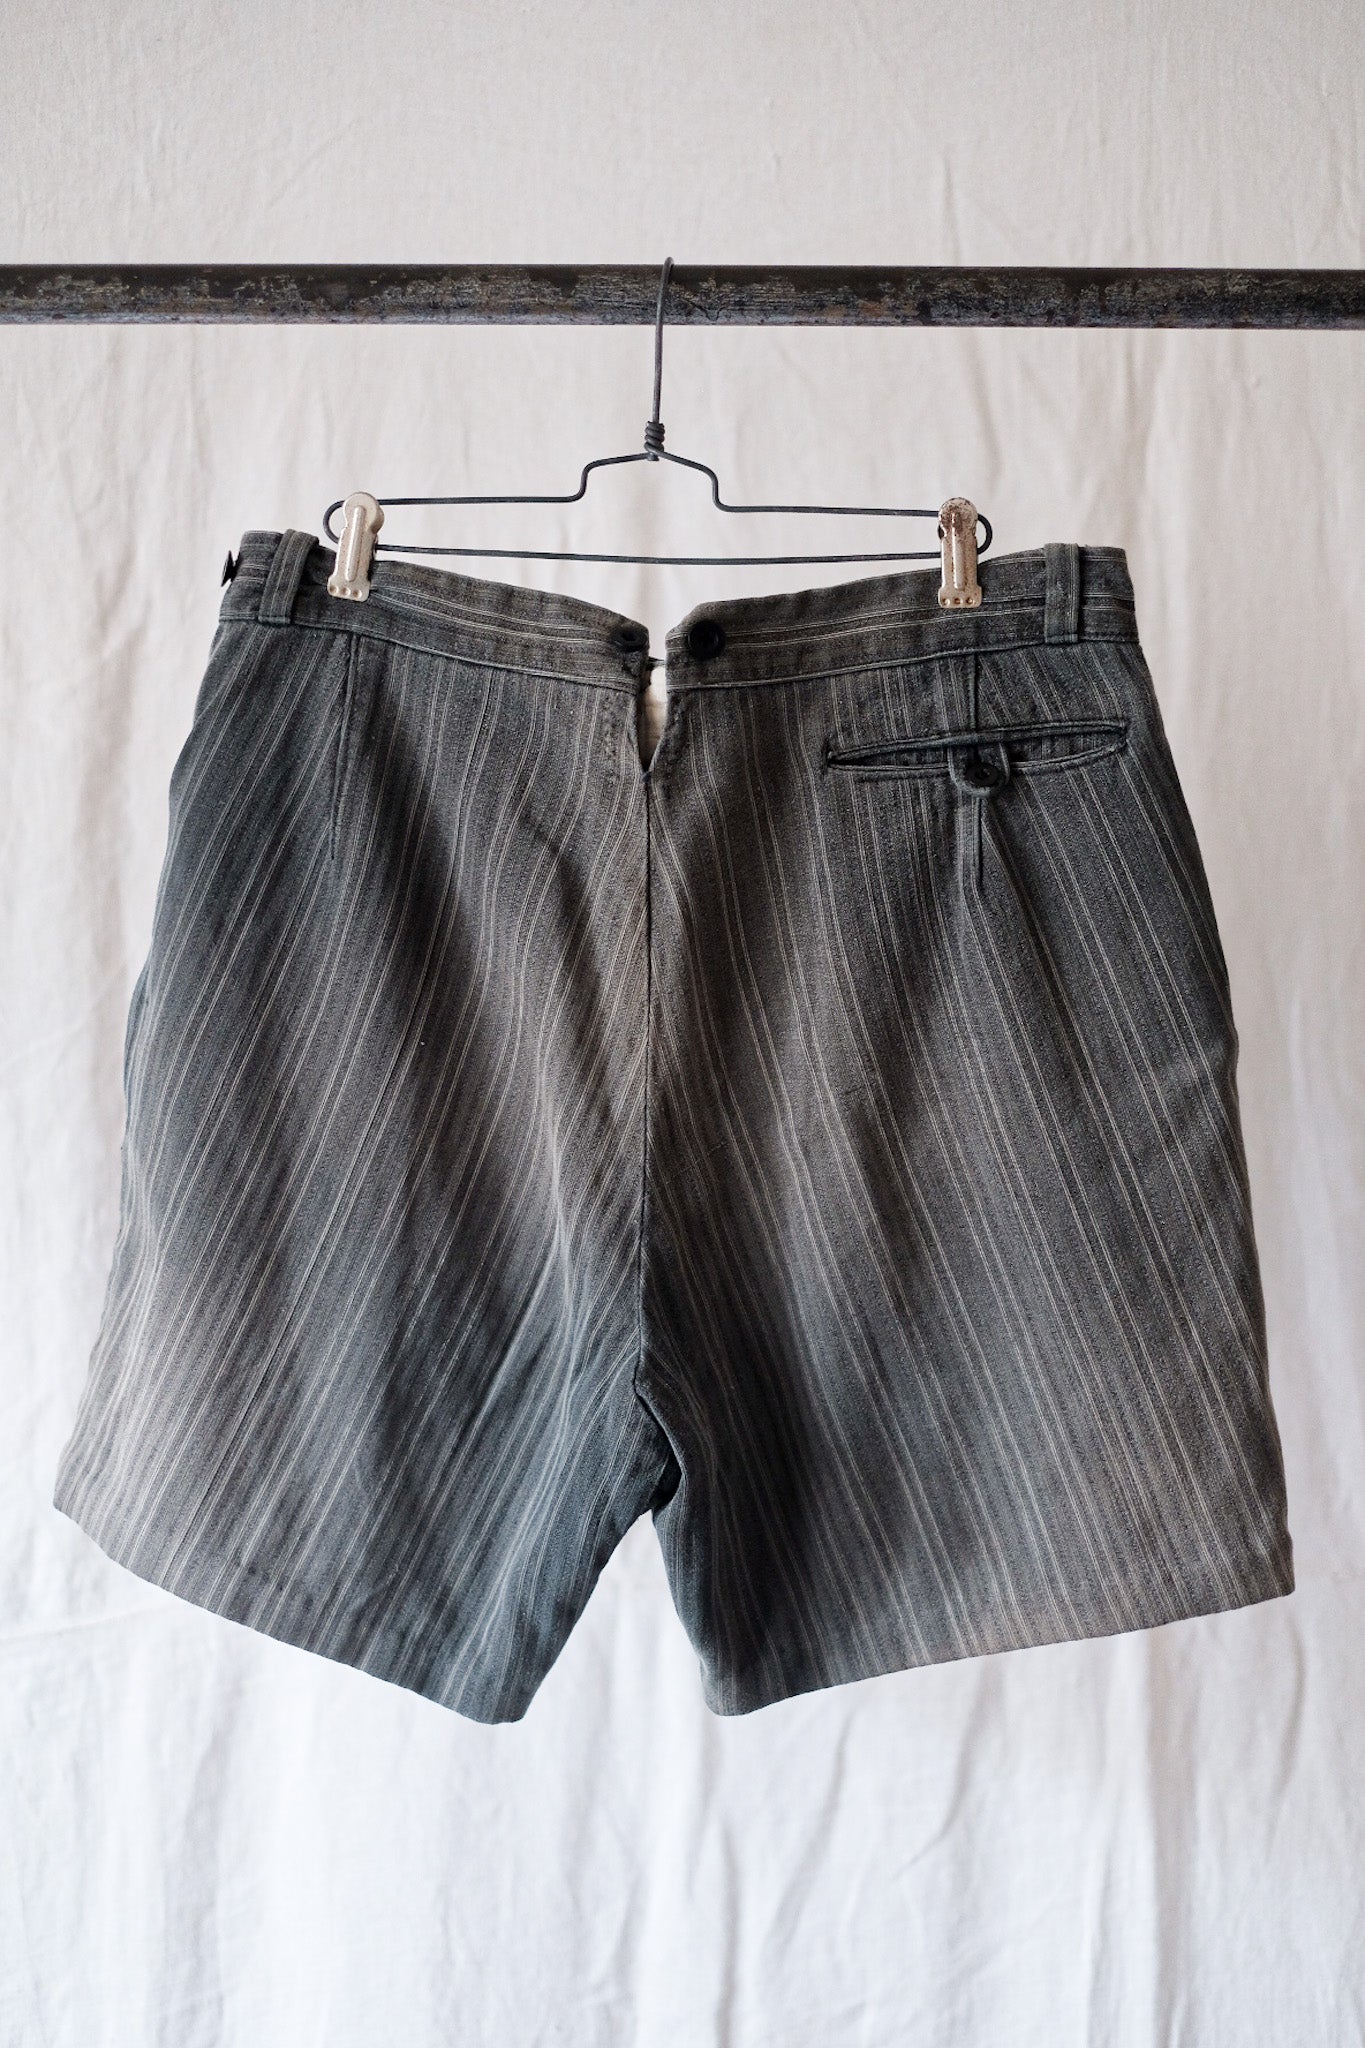 【~40's】French Vintage Cotton Striped Work Shorts